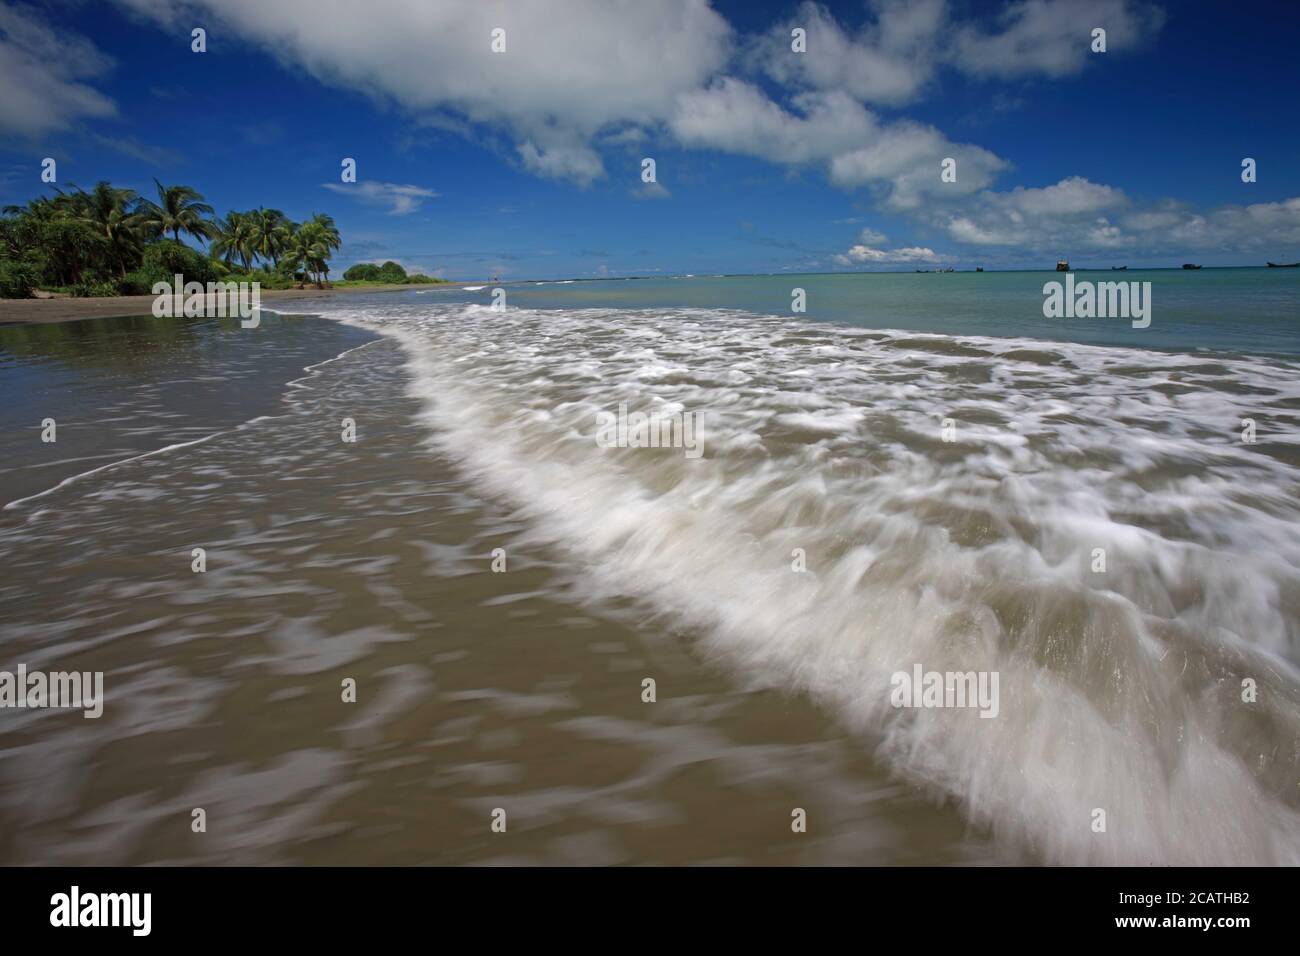 Huge tides in the Bay of Bengal at the Saint Martin’s Island, locally known as Narkel Jinjira. It is the only coral island. Stock Photo